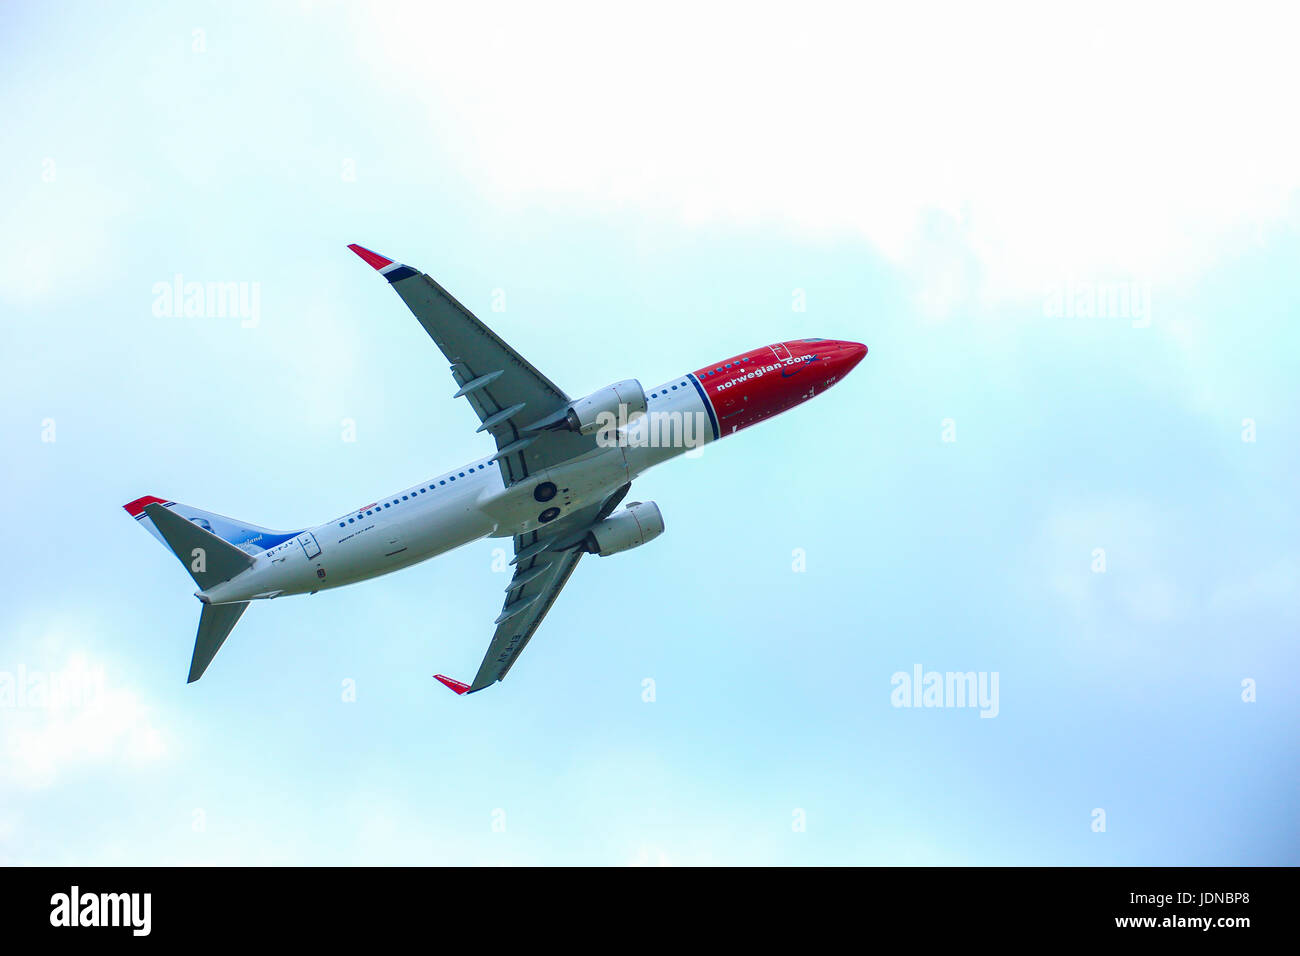 Norwegian airline aircraft takeoff Stock Photo